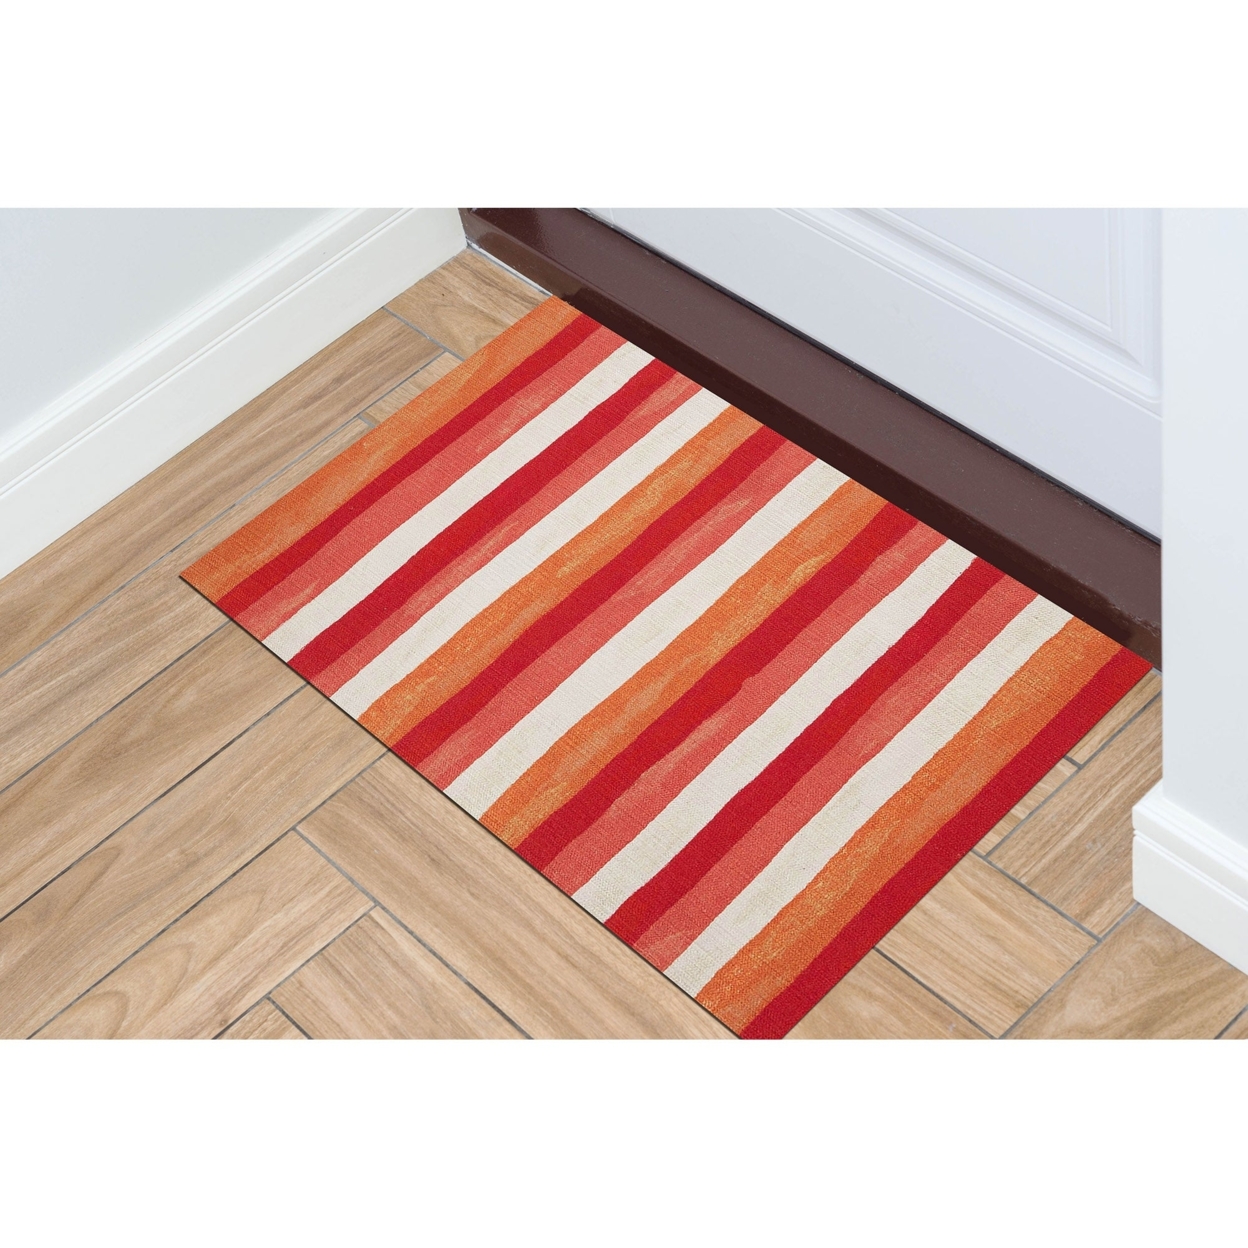 Liora Manne Visions II Painted Stripes Indoor Outdoor Area Rug Warm - 5' X 8'